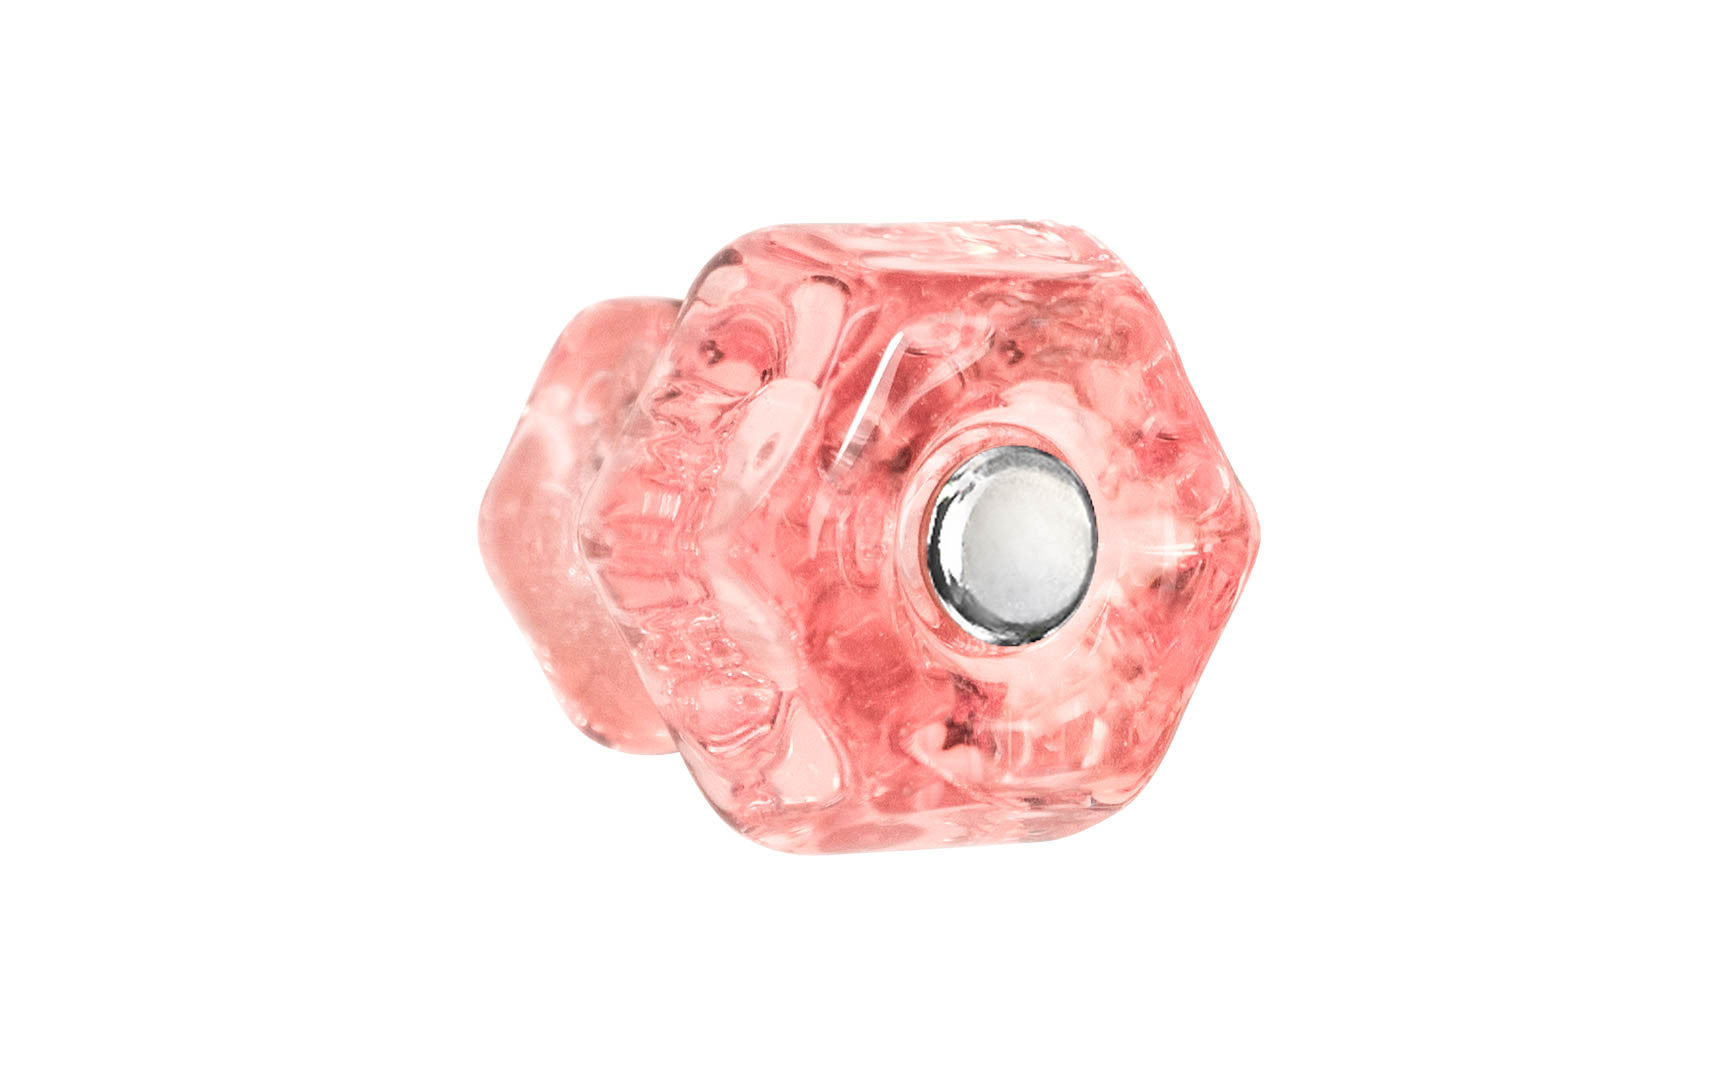 Vintage-style Hardware · Classic & original-style hexagonal glass cabinet knob with a silver pan head thru-bolt. Made of genuine glass. Depression Pink Rose color glass. Includes a silver pan thru-bolt. Reproduction hexagonal classic glass knob. Traditional hex glass knob. 1-1/4" Diameter